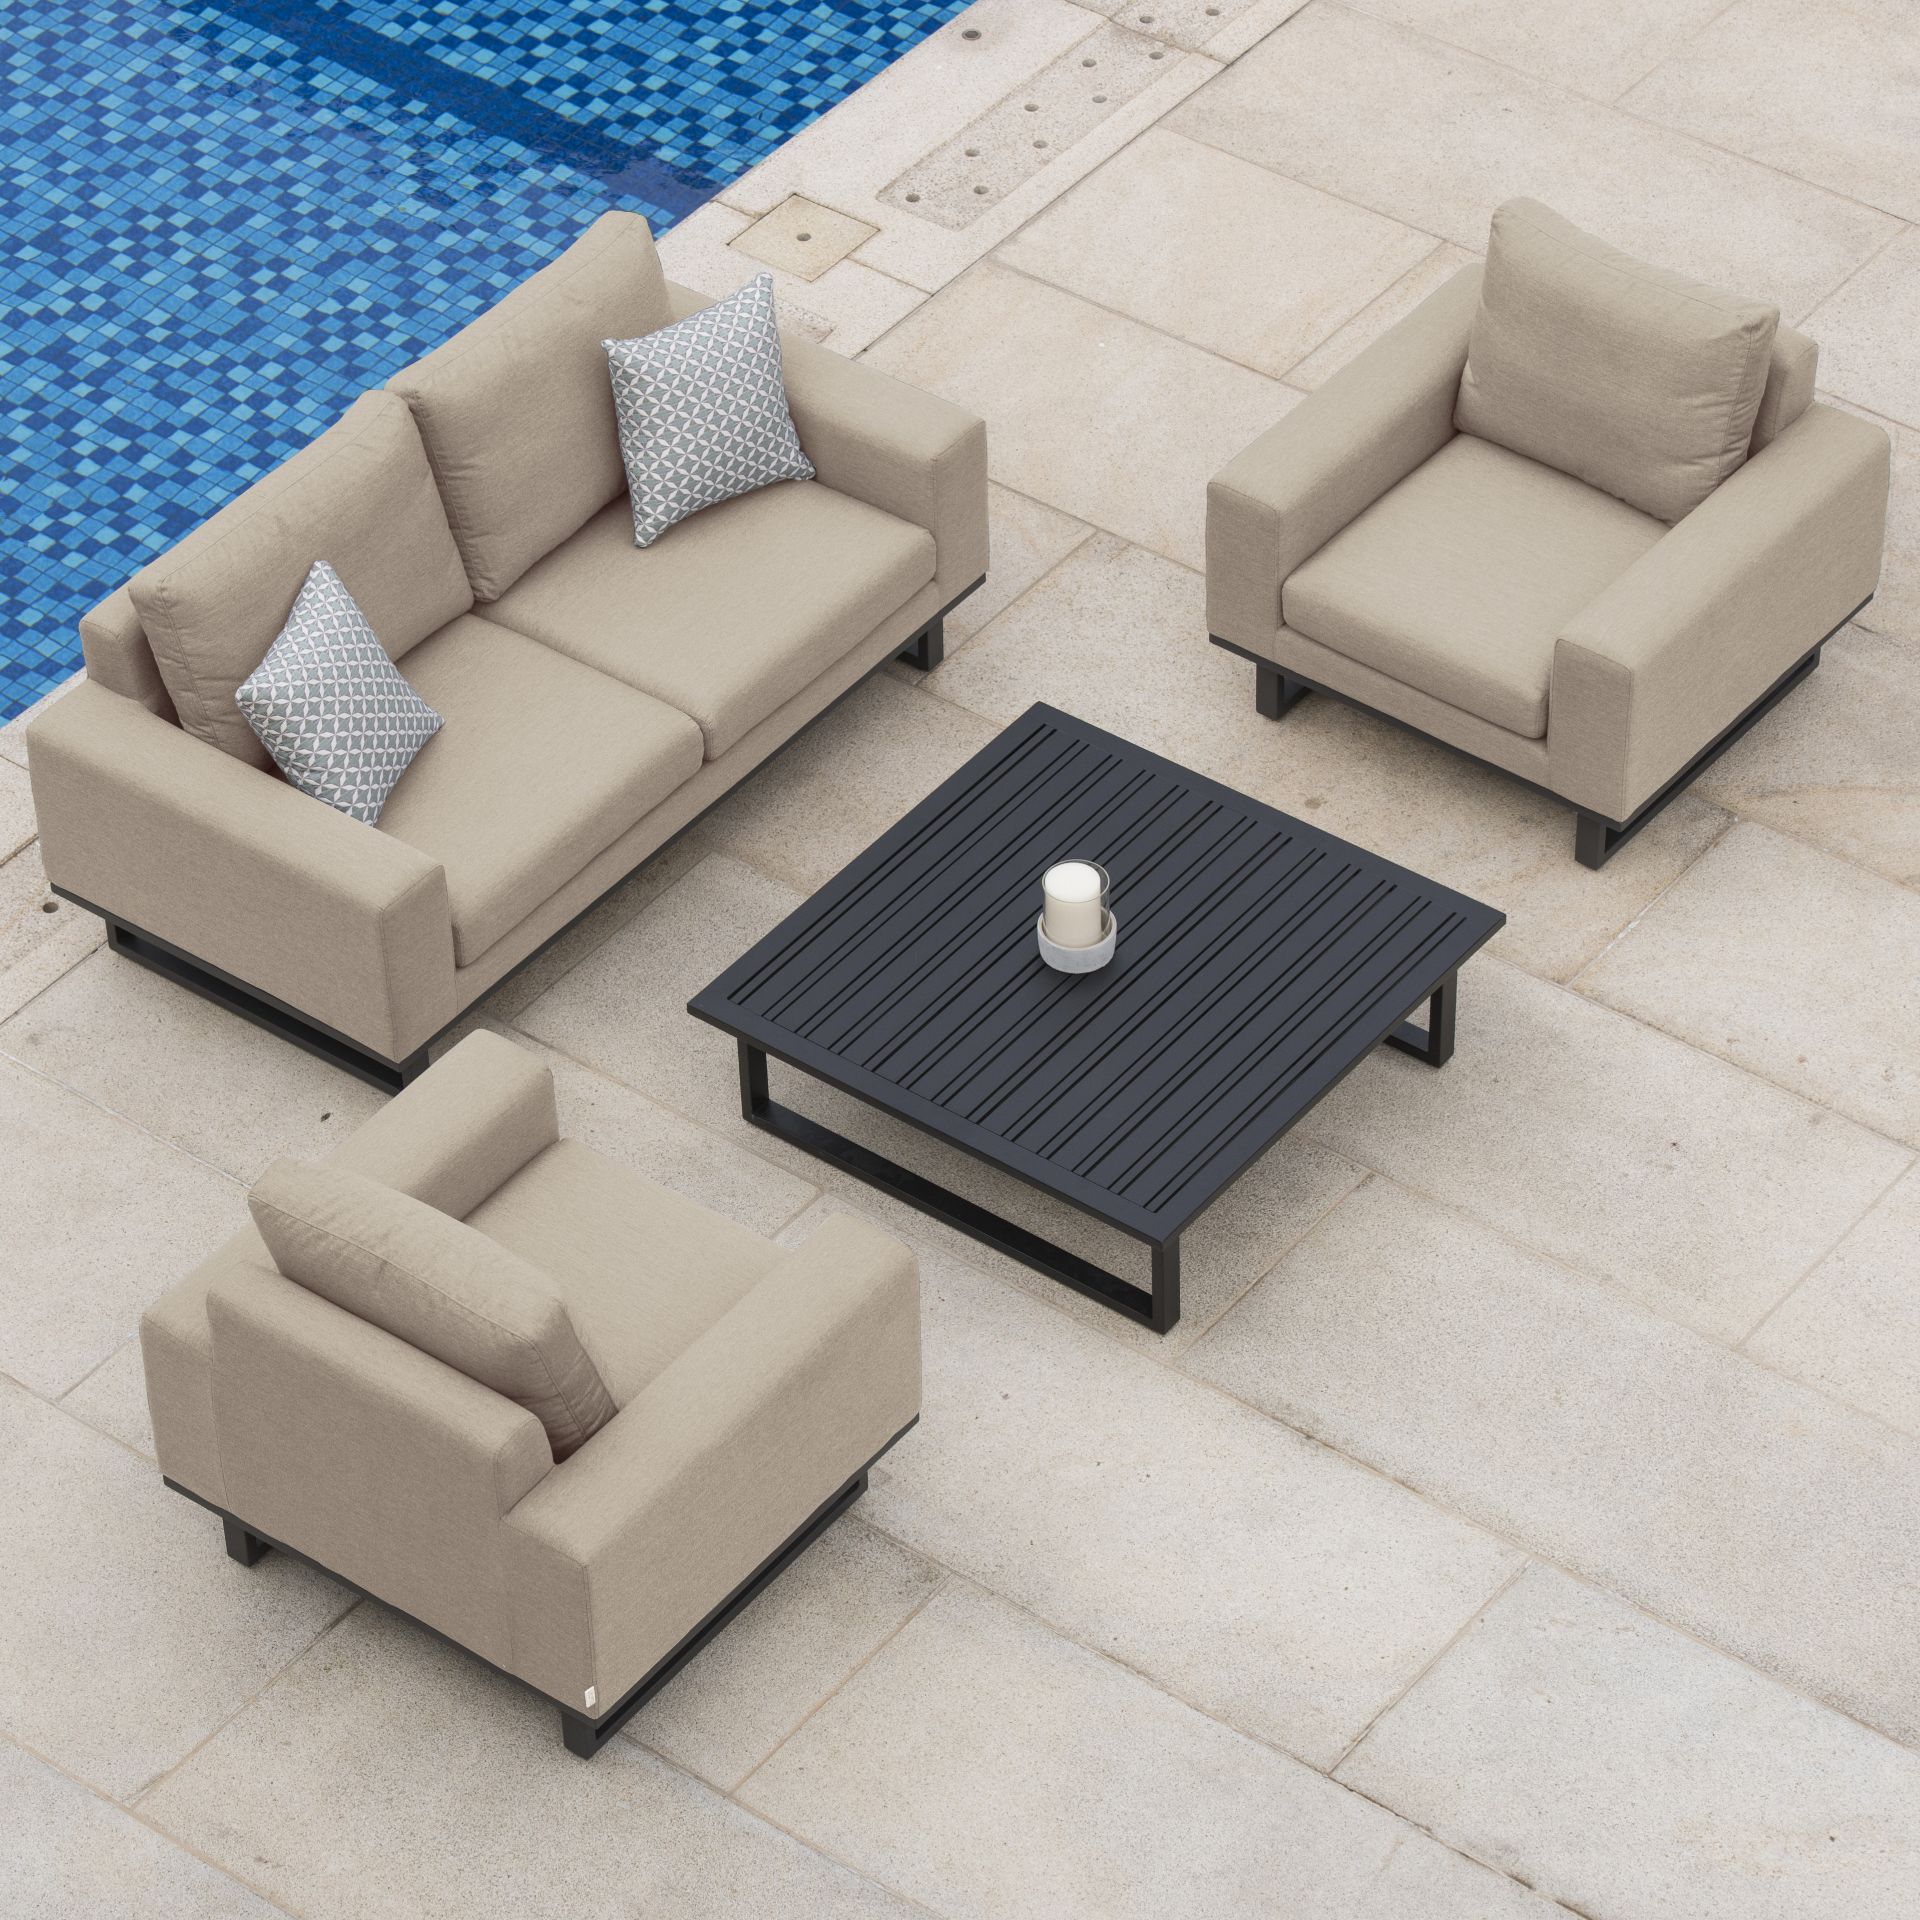 Ethos Outdoor 2 Seat Sofa Set With Coffee Table (Taupe) *BRAND NEW* - Image 5 of 8